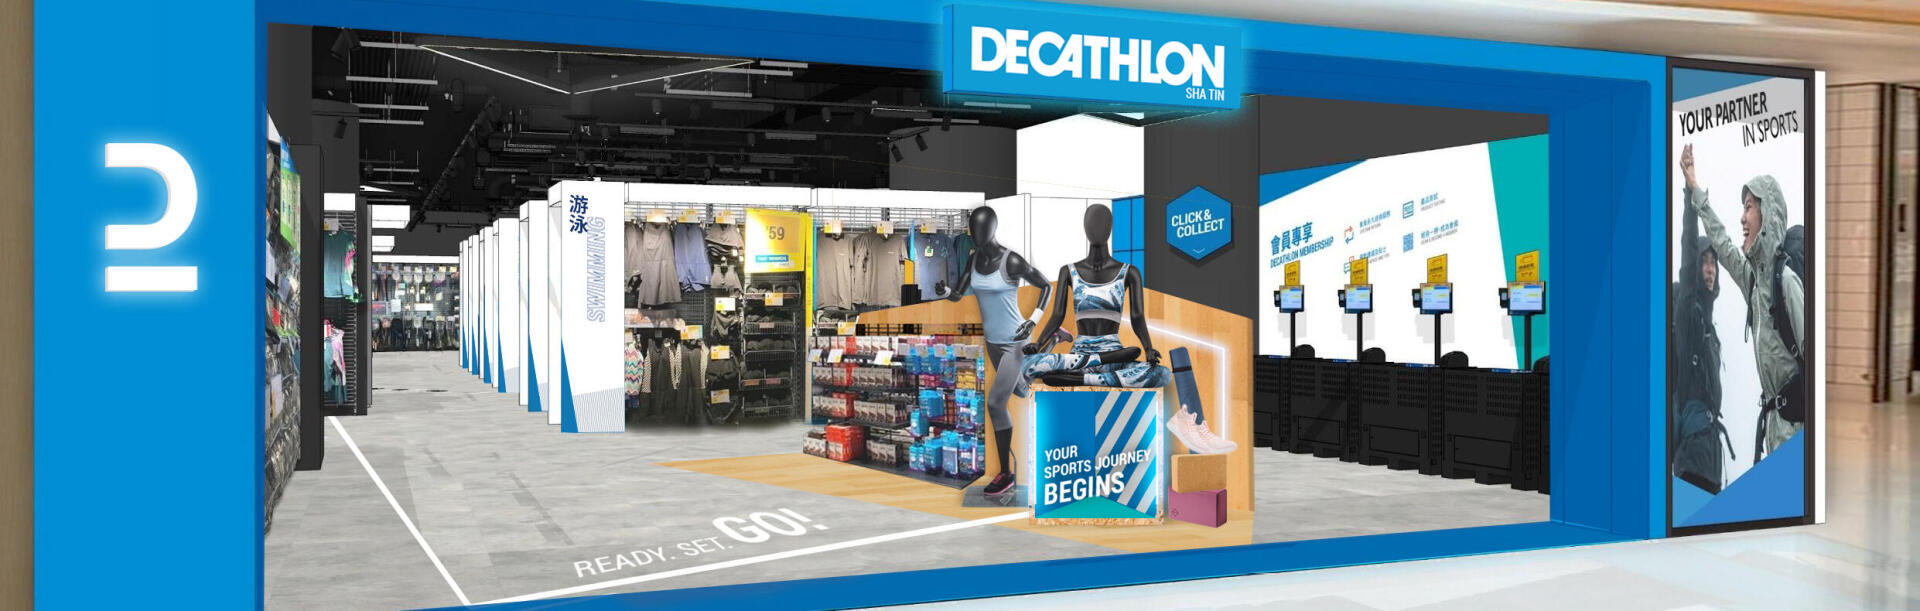 DECATHLON GRAND OPENING IN SHA TIN AND MA ON SHAN